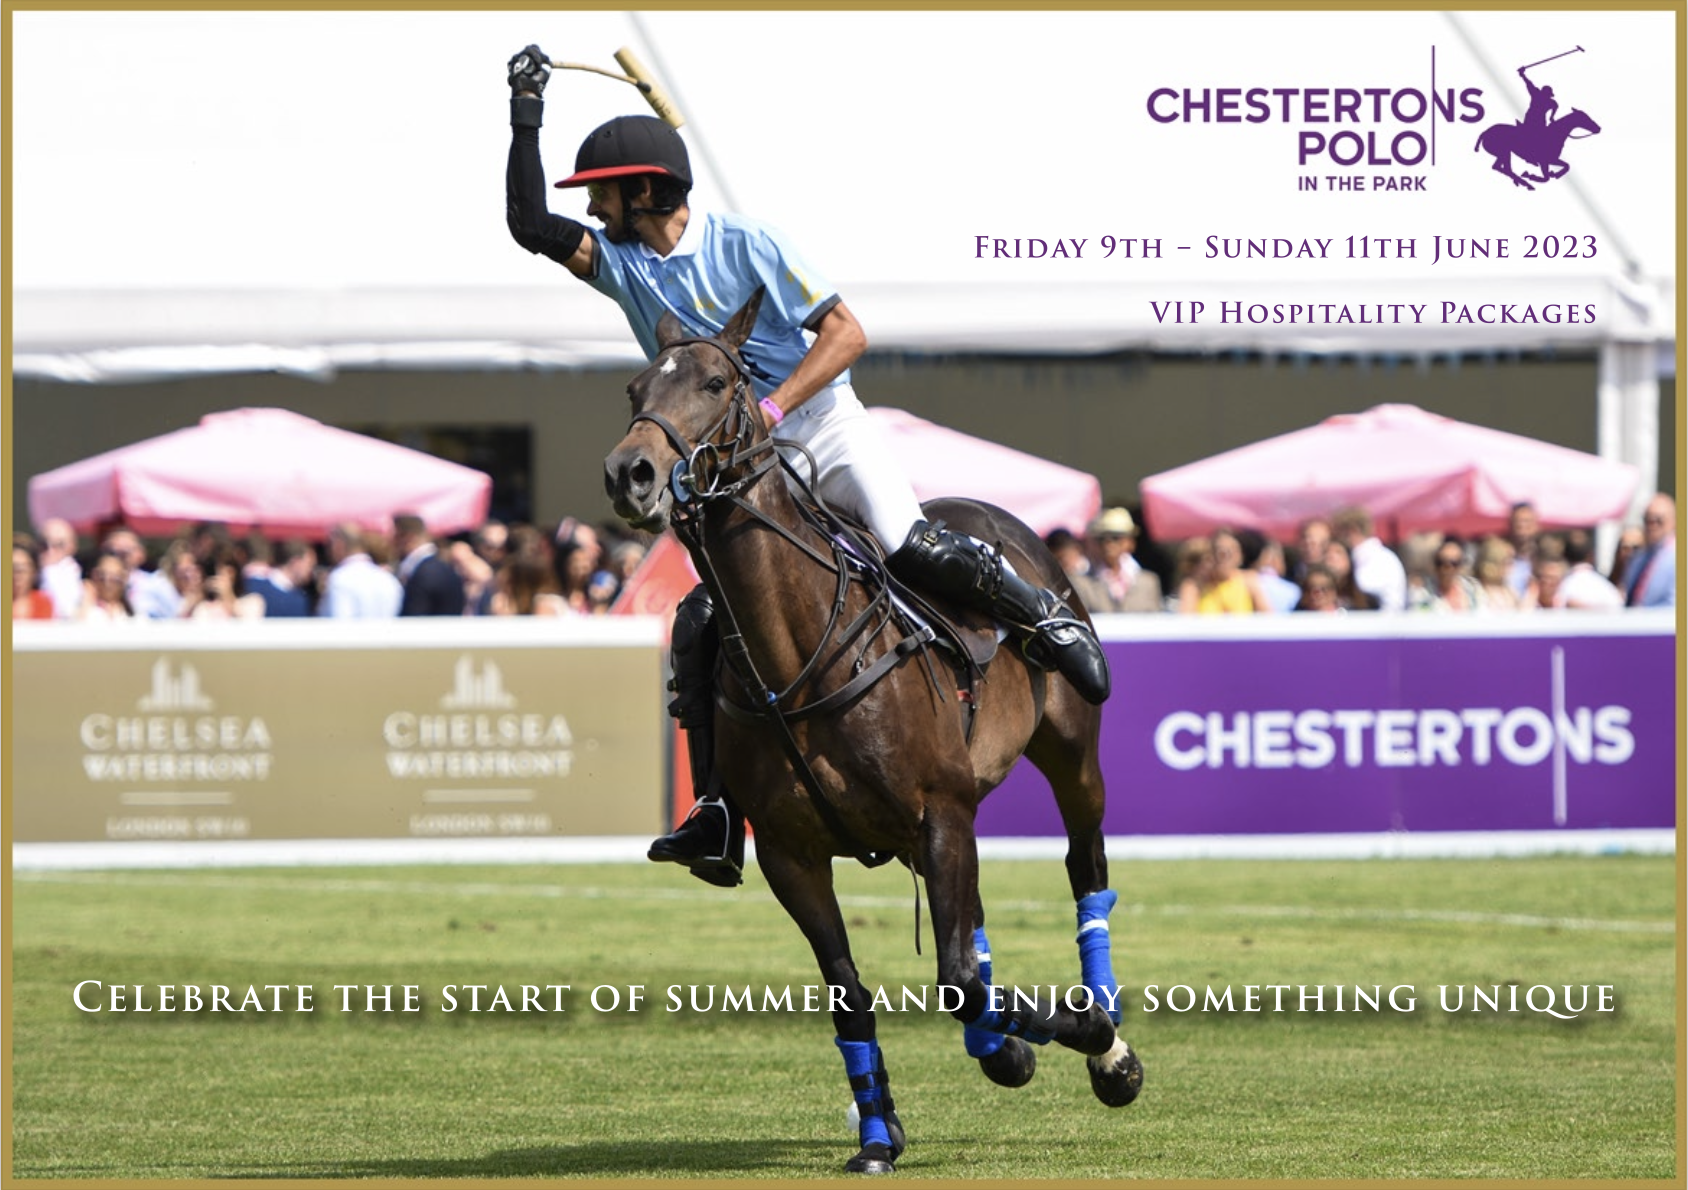 Attend Polo in the Park